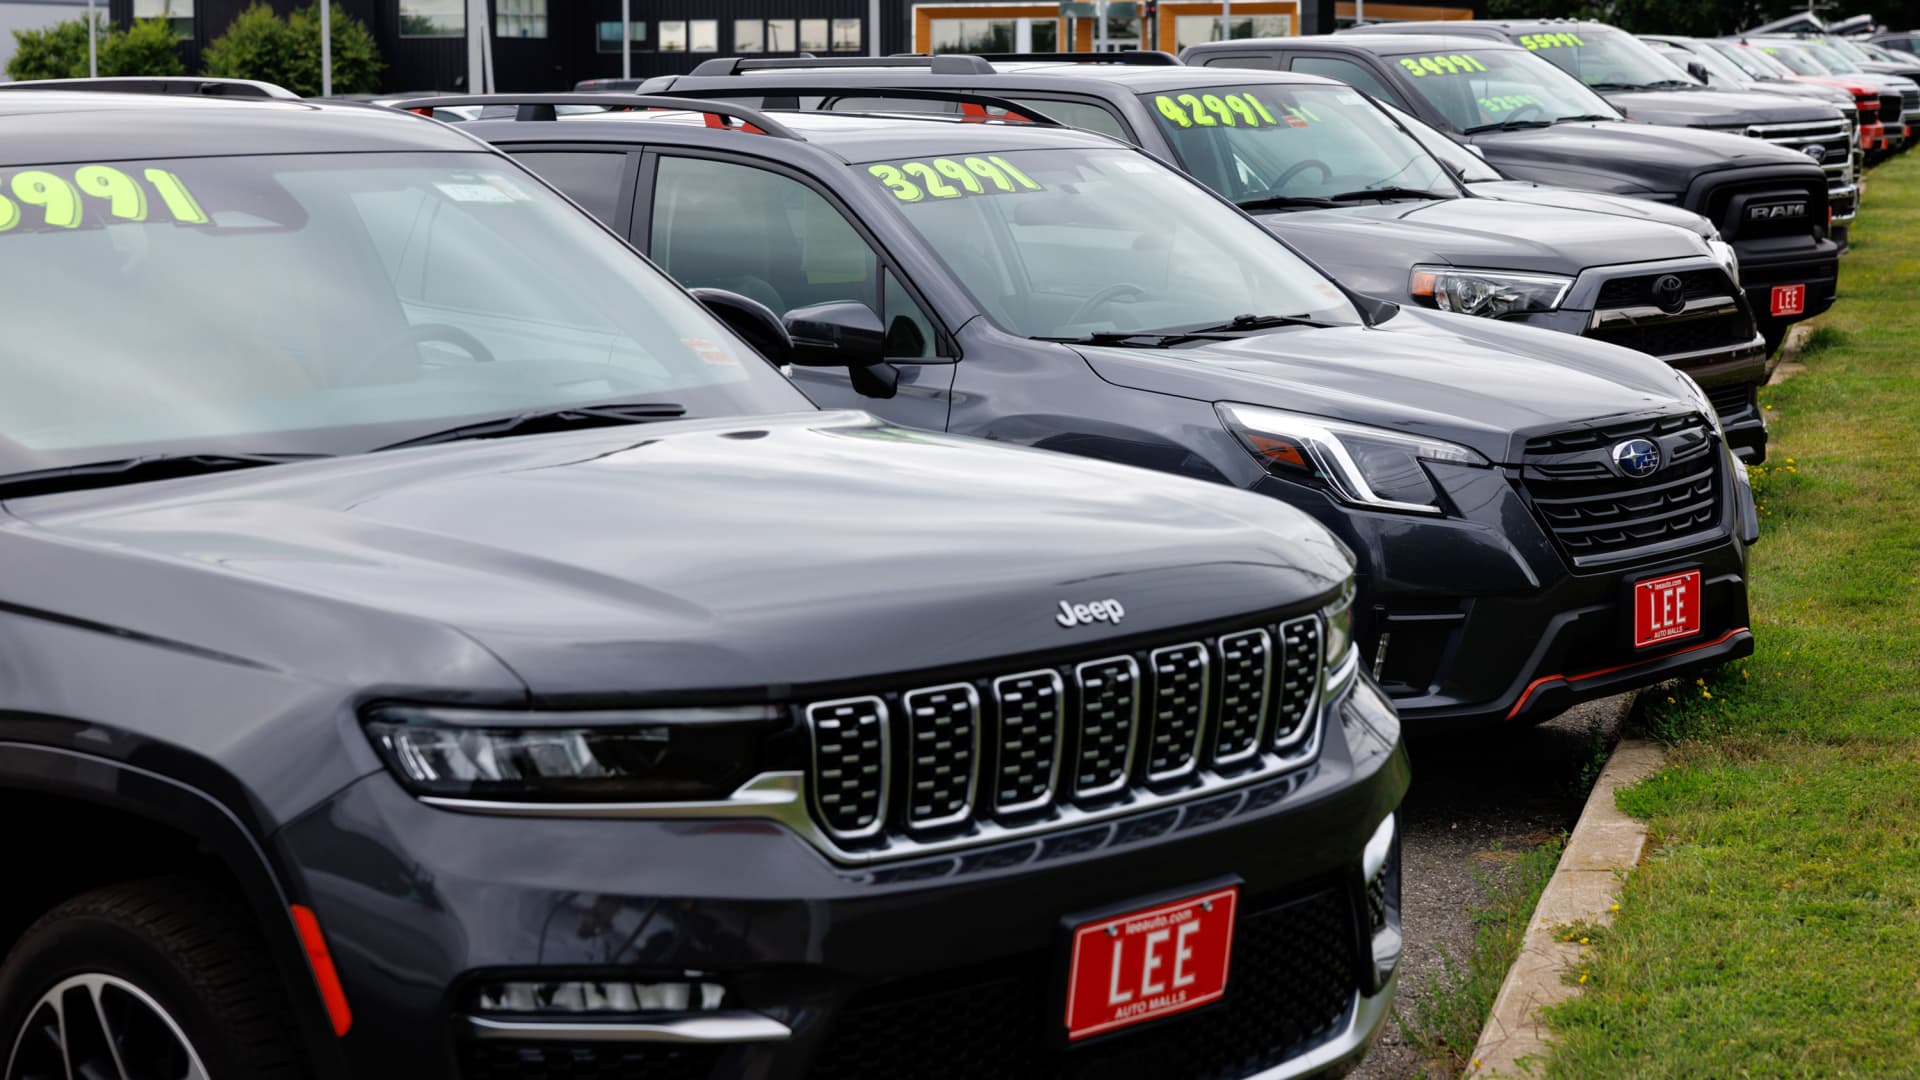 Used car prices expected to stabilize in 2024 after two years of decreases from record highs